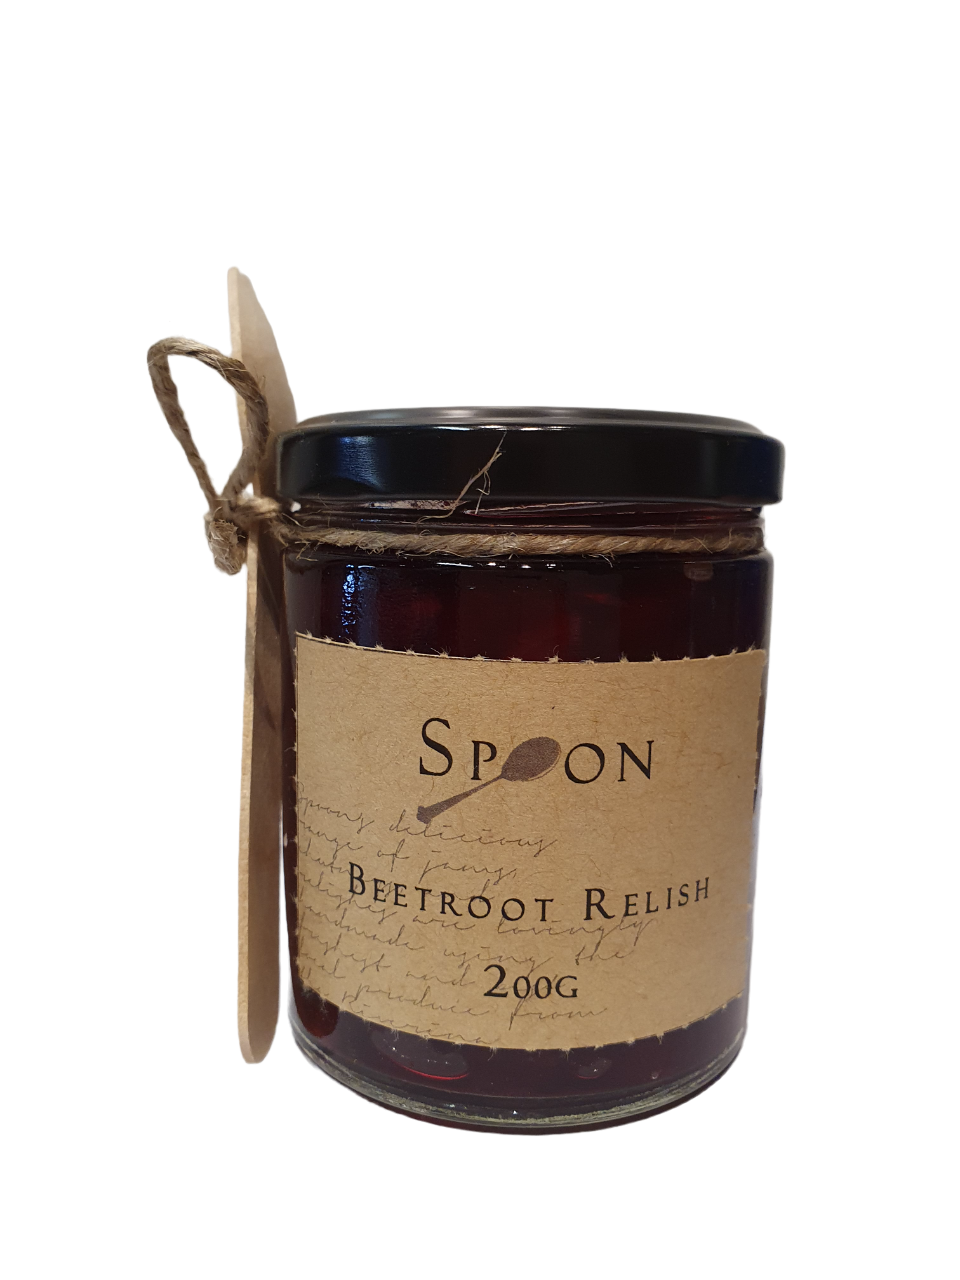 Spoon Beetroot Relish 200g